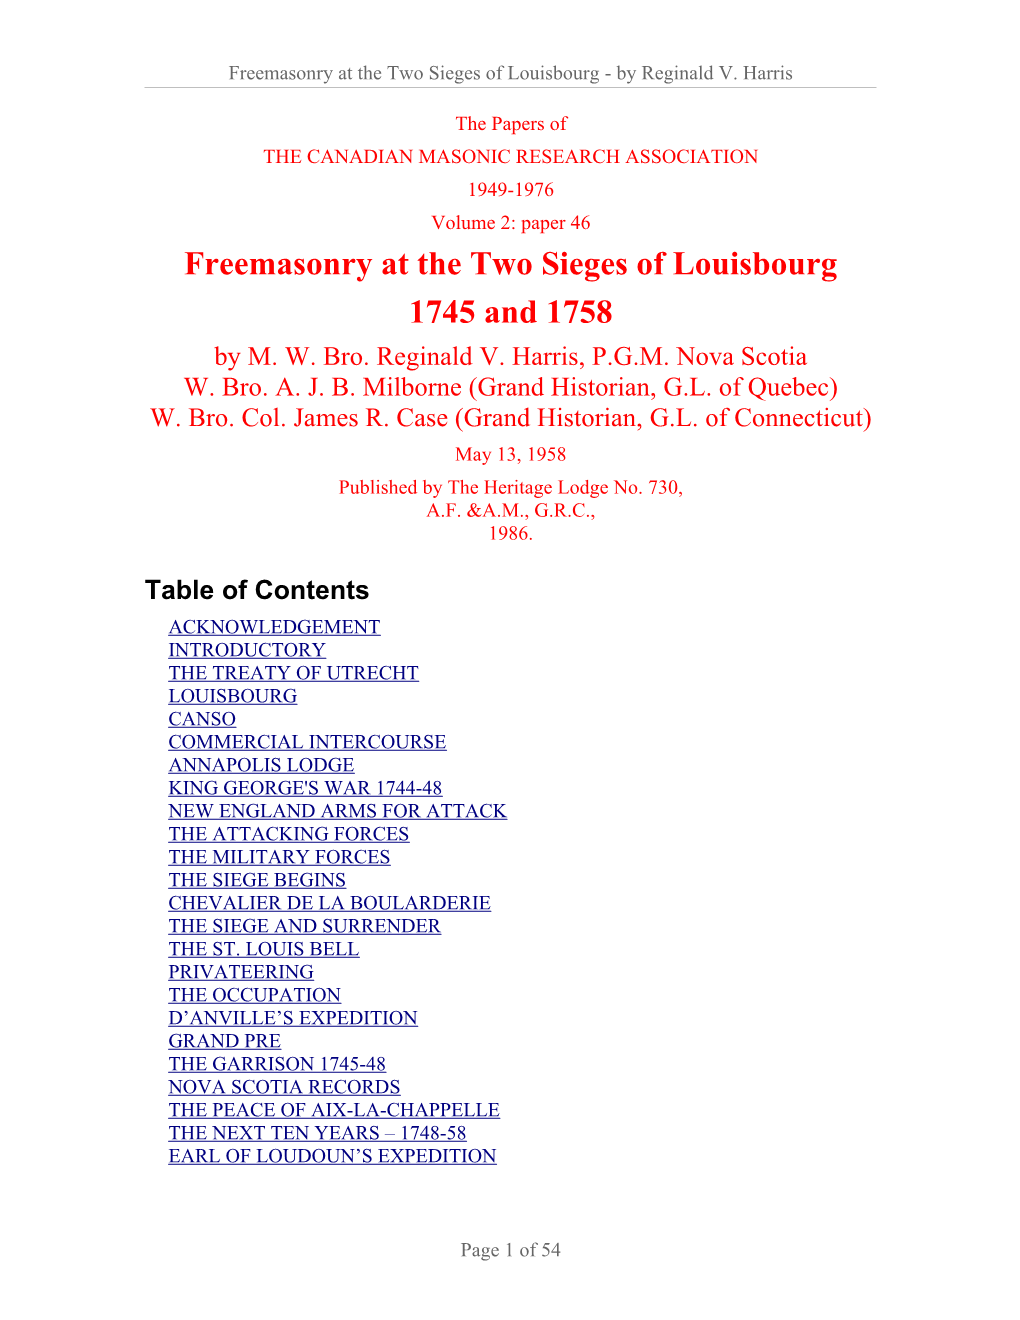 Freemasonry at the Two Sieges of Louisbourg 1745 and 1758 by M